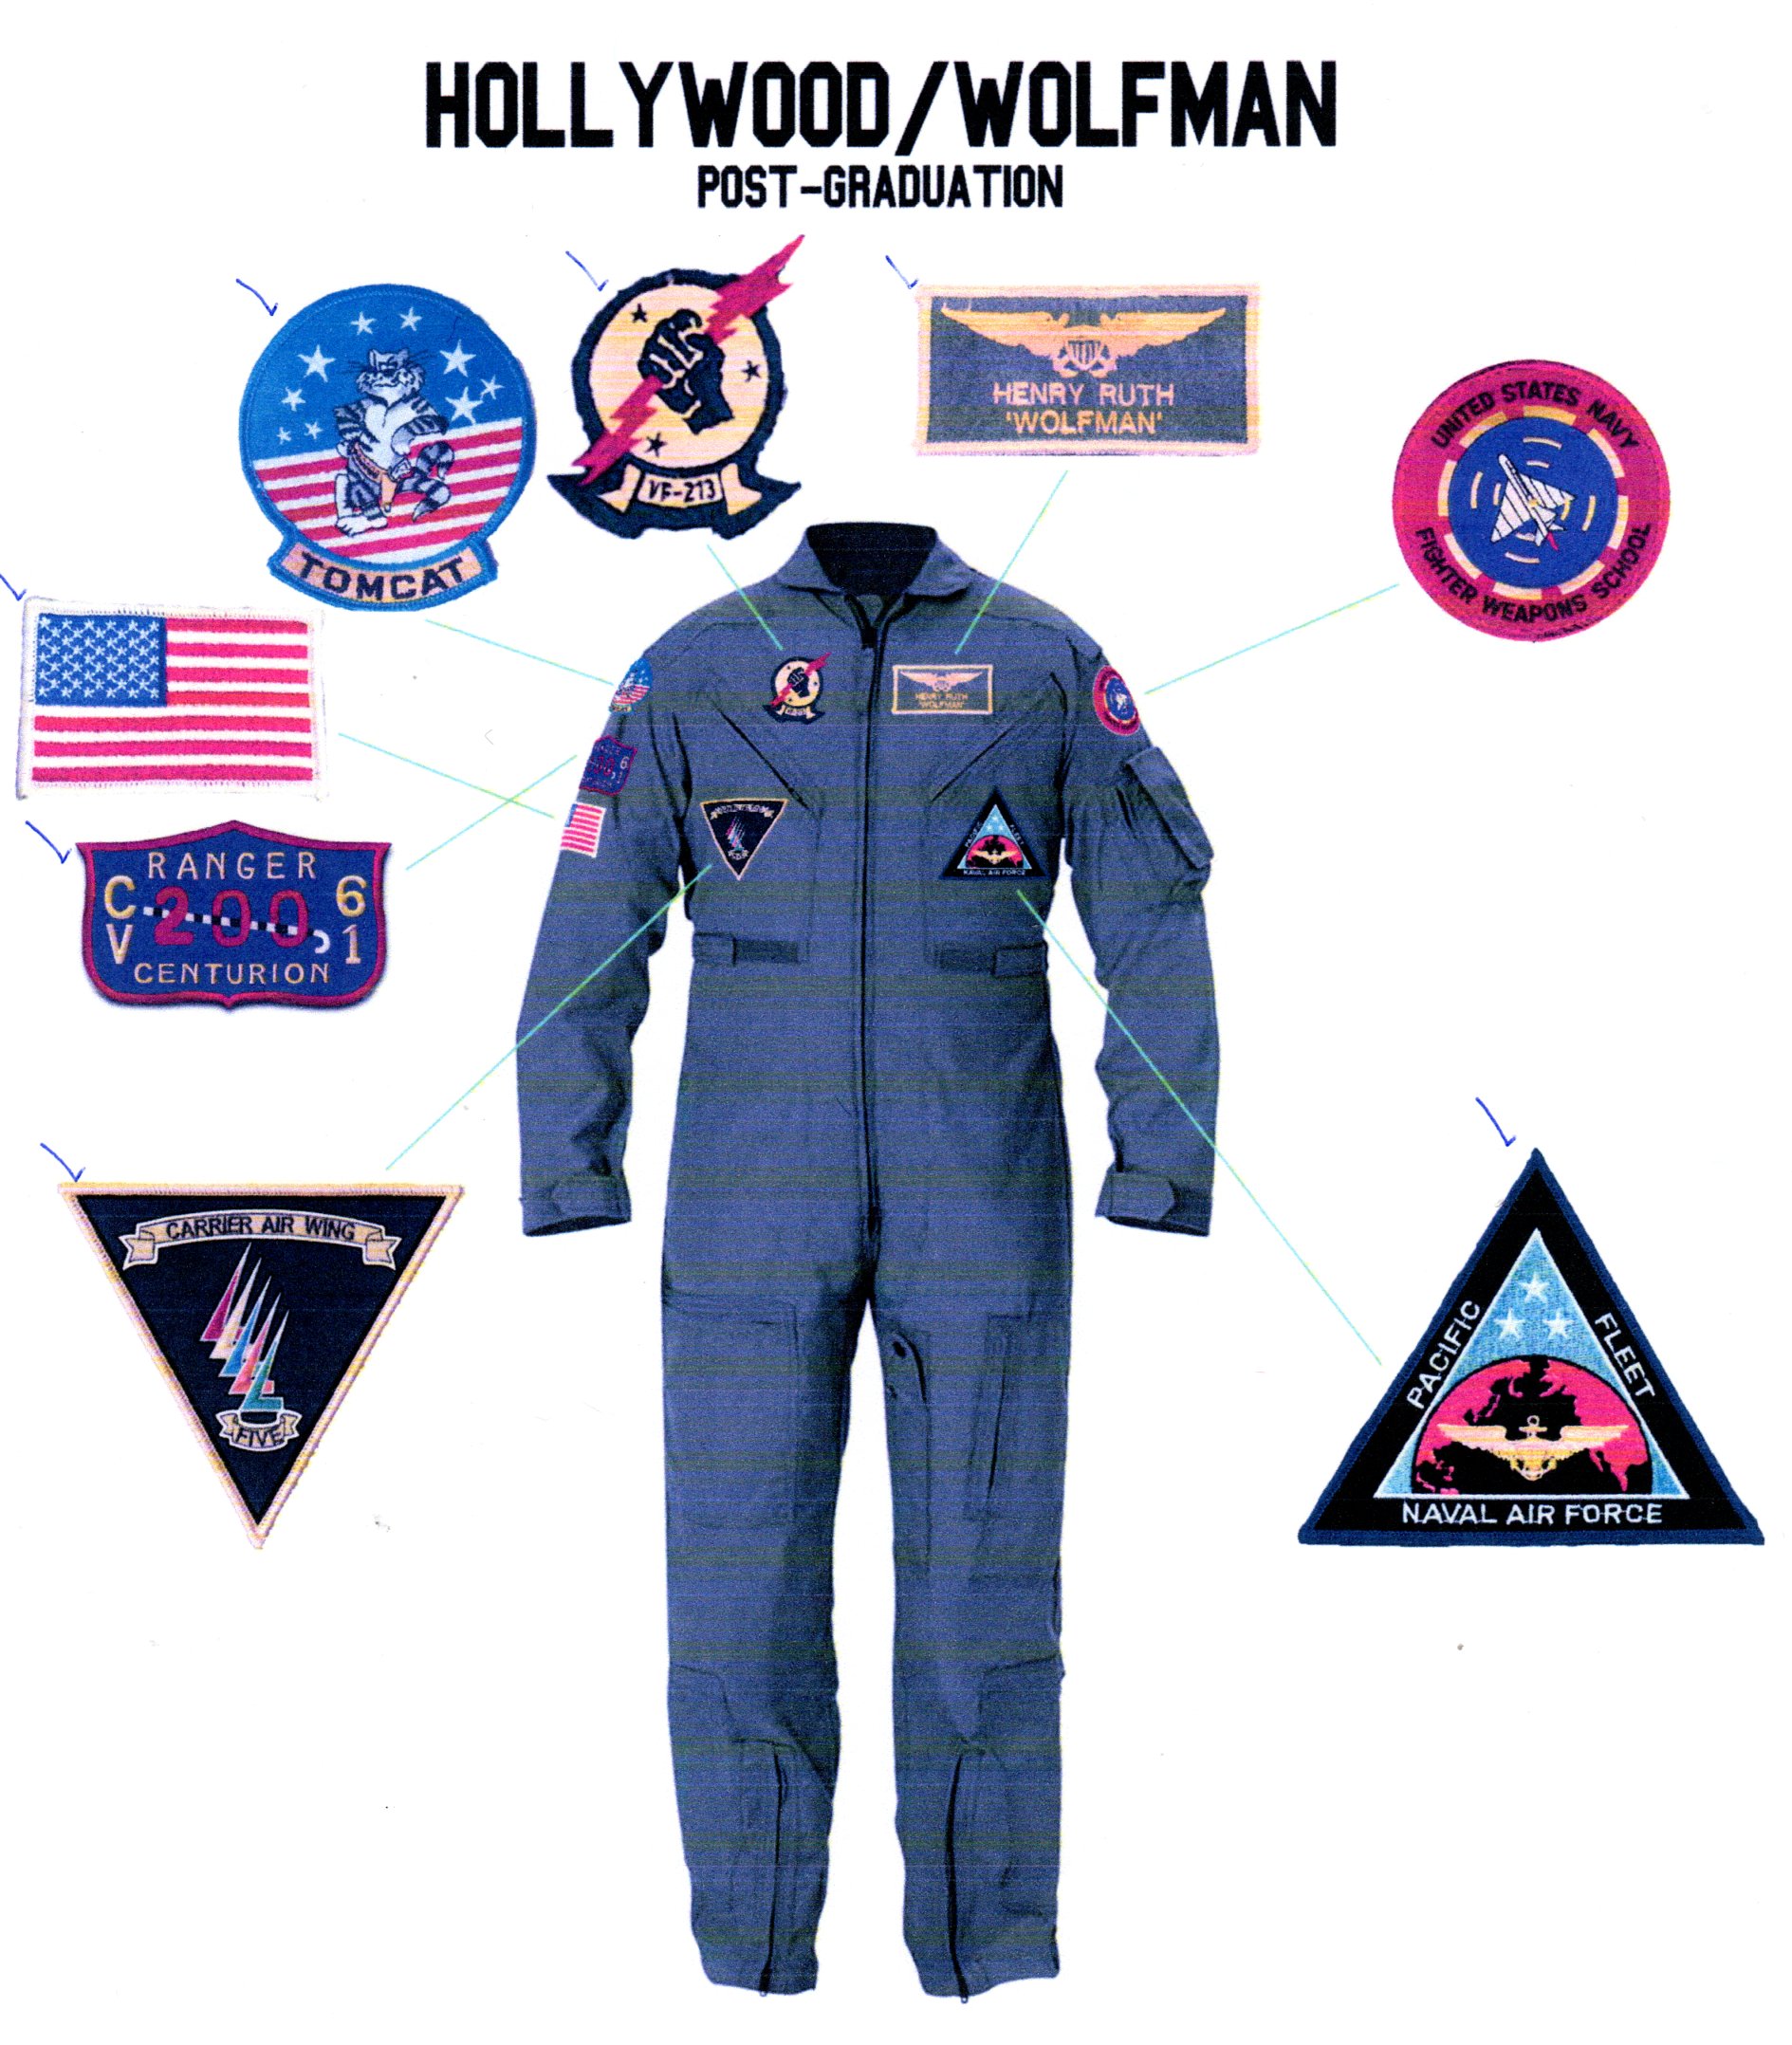 HOLLYWOOD's 'Post-Grad' FS Patches!